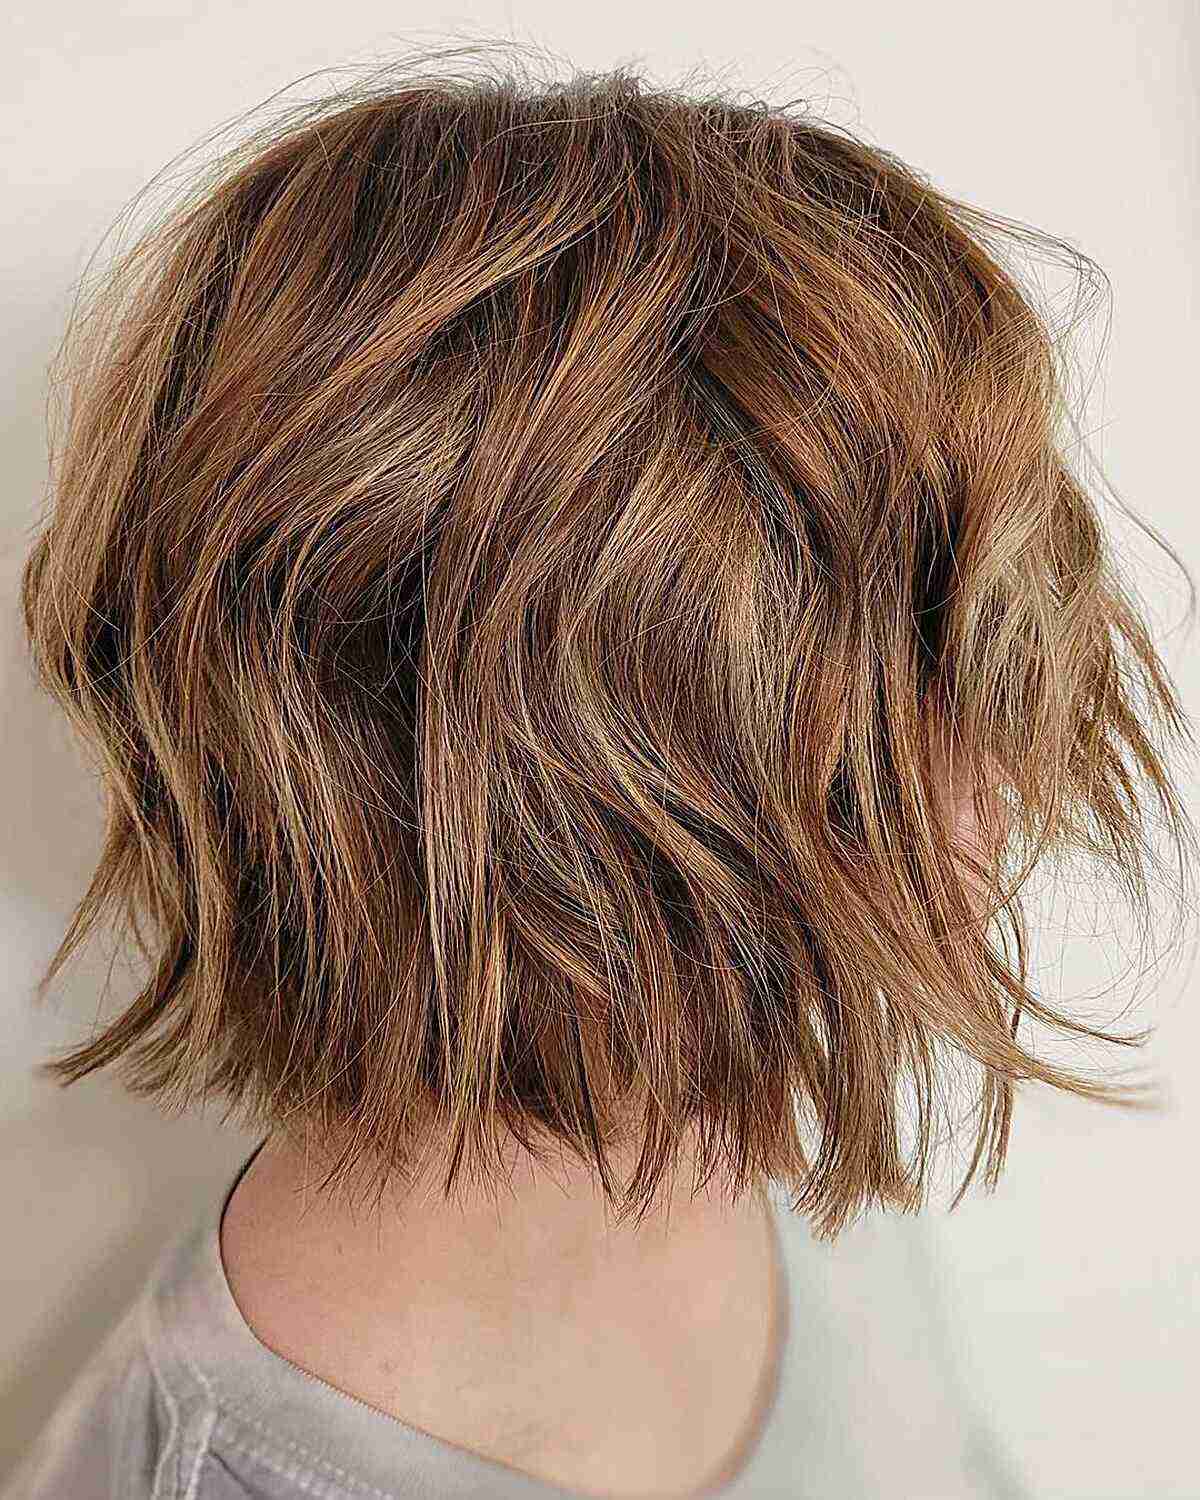 Short Textured Shattered Bob Cut with Tousled Style